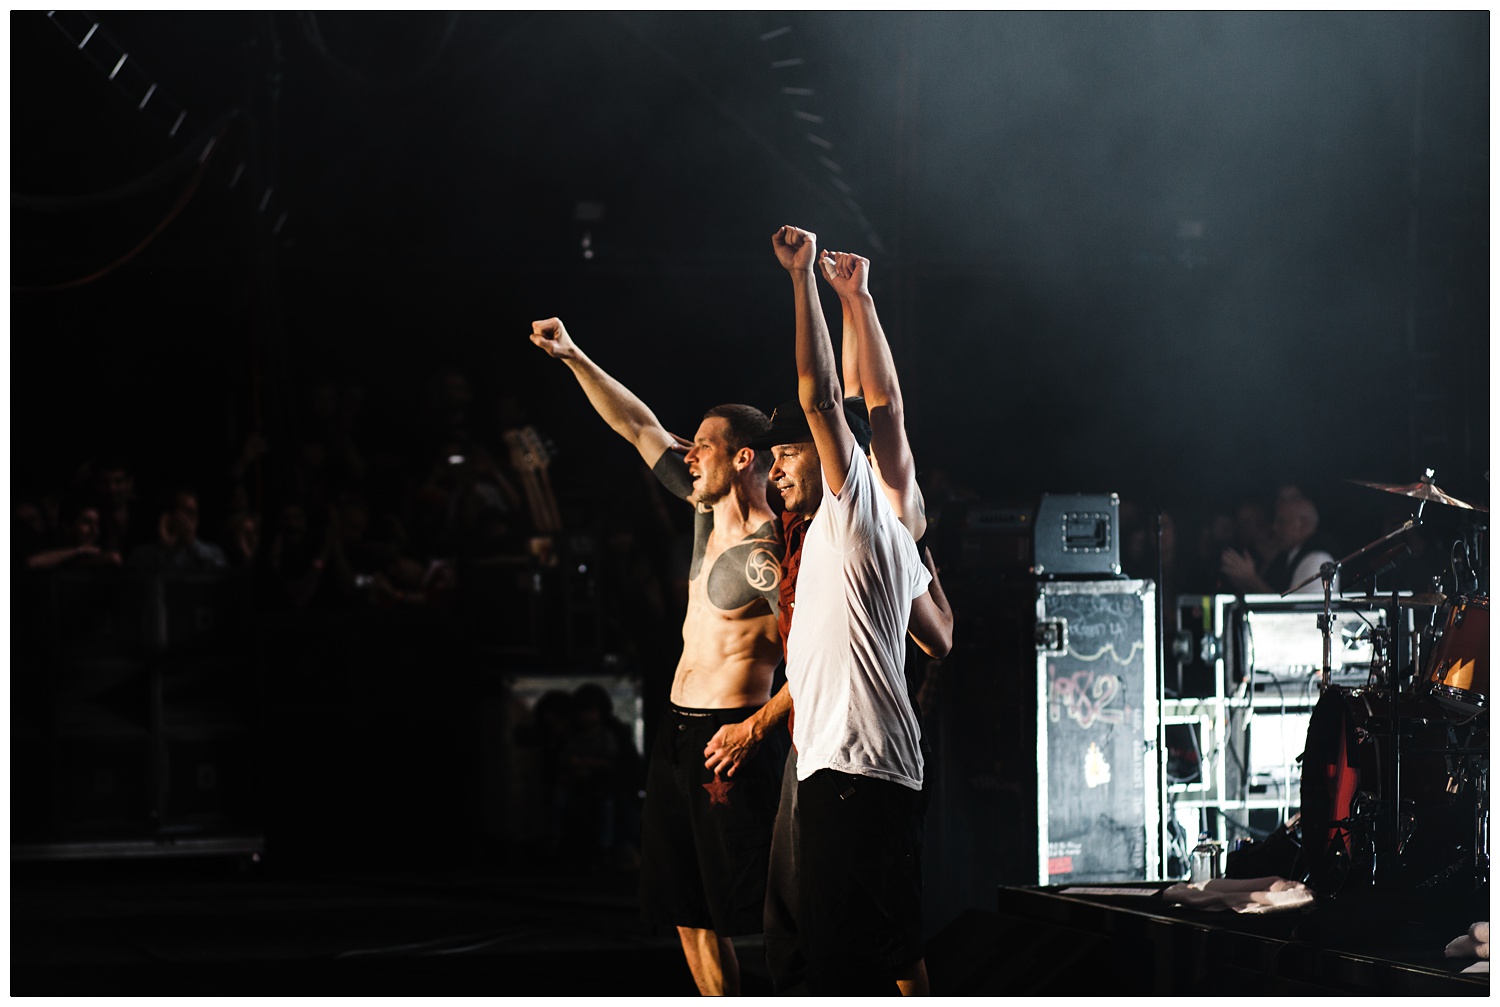 Rage Against the Machine at the end of the Finsbury Park concert in 2010